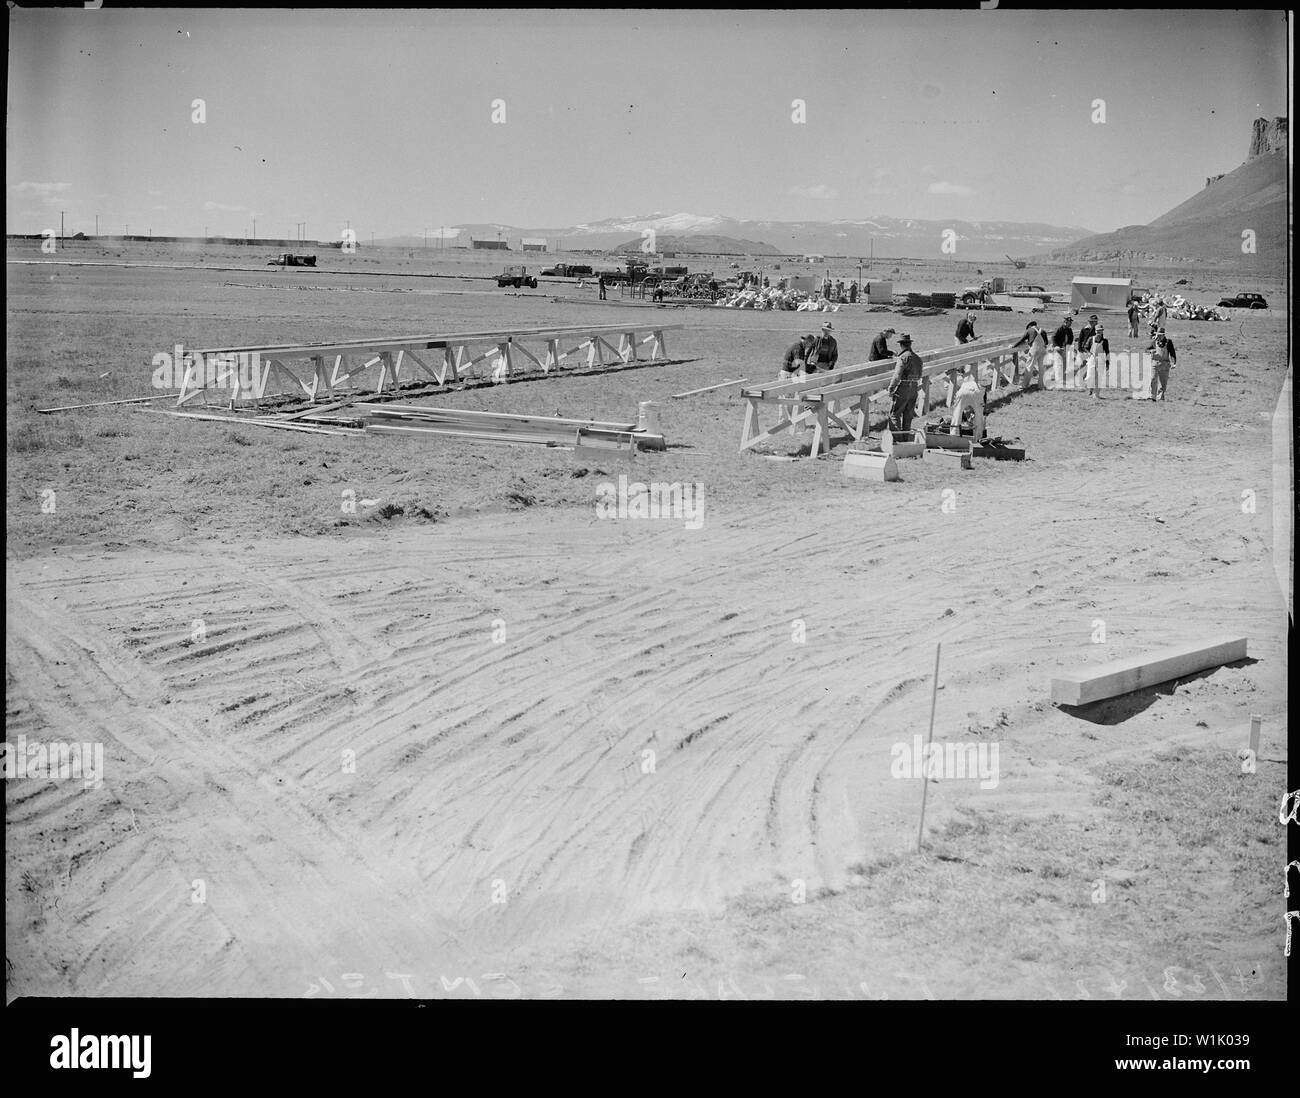 Tule Lake Relocation Center, Newell, California. Construction begins on a War Relocation Authority . . .; Scope and content:  The full caption for this photograph reads: Tule Lake Relocation Center, Newell, California. Construction begins on a War Relocation Authority center for evacuees of Japanese ancestry near Tule Lake in Modoc County, California, south of the Oregon border. Stock Photo